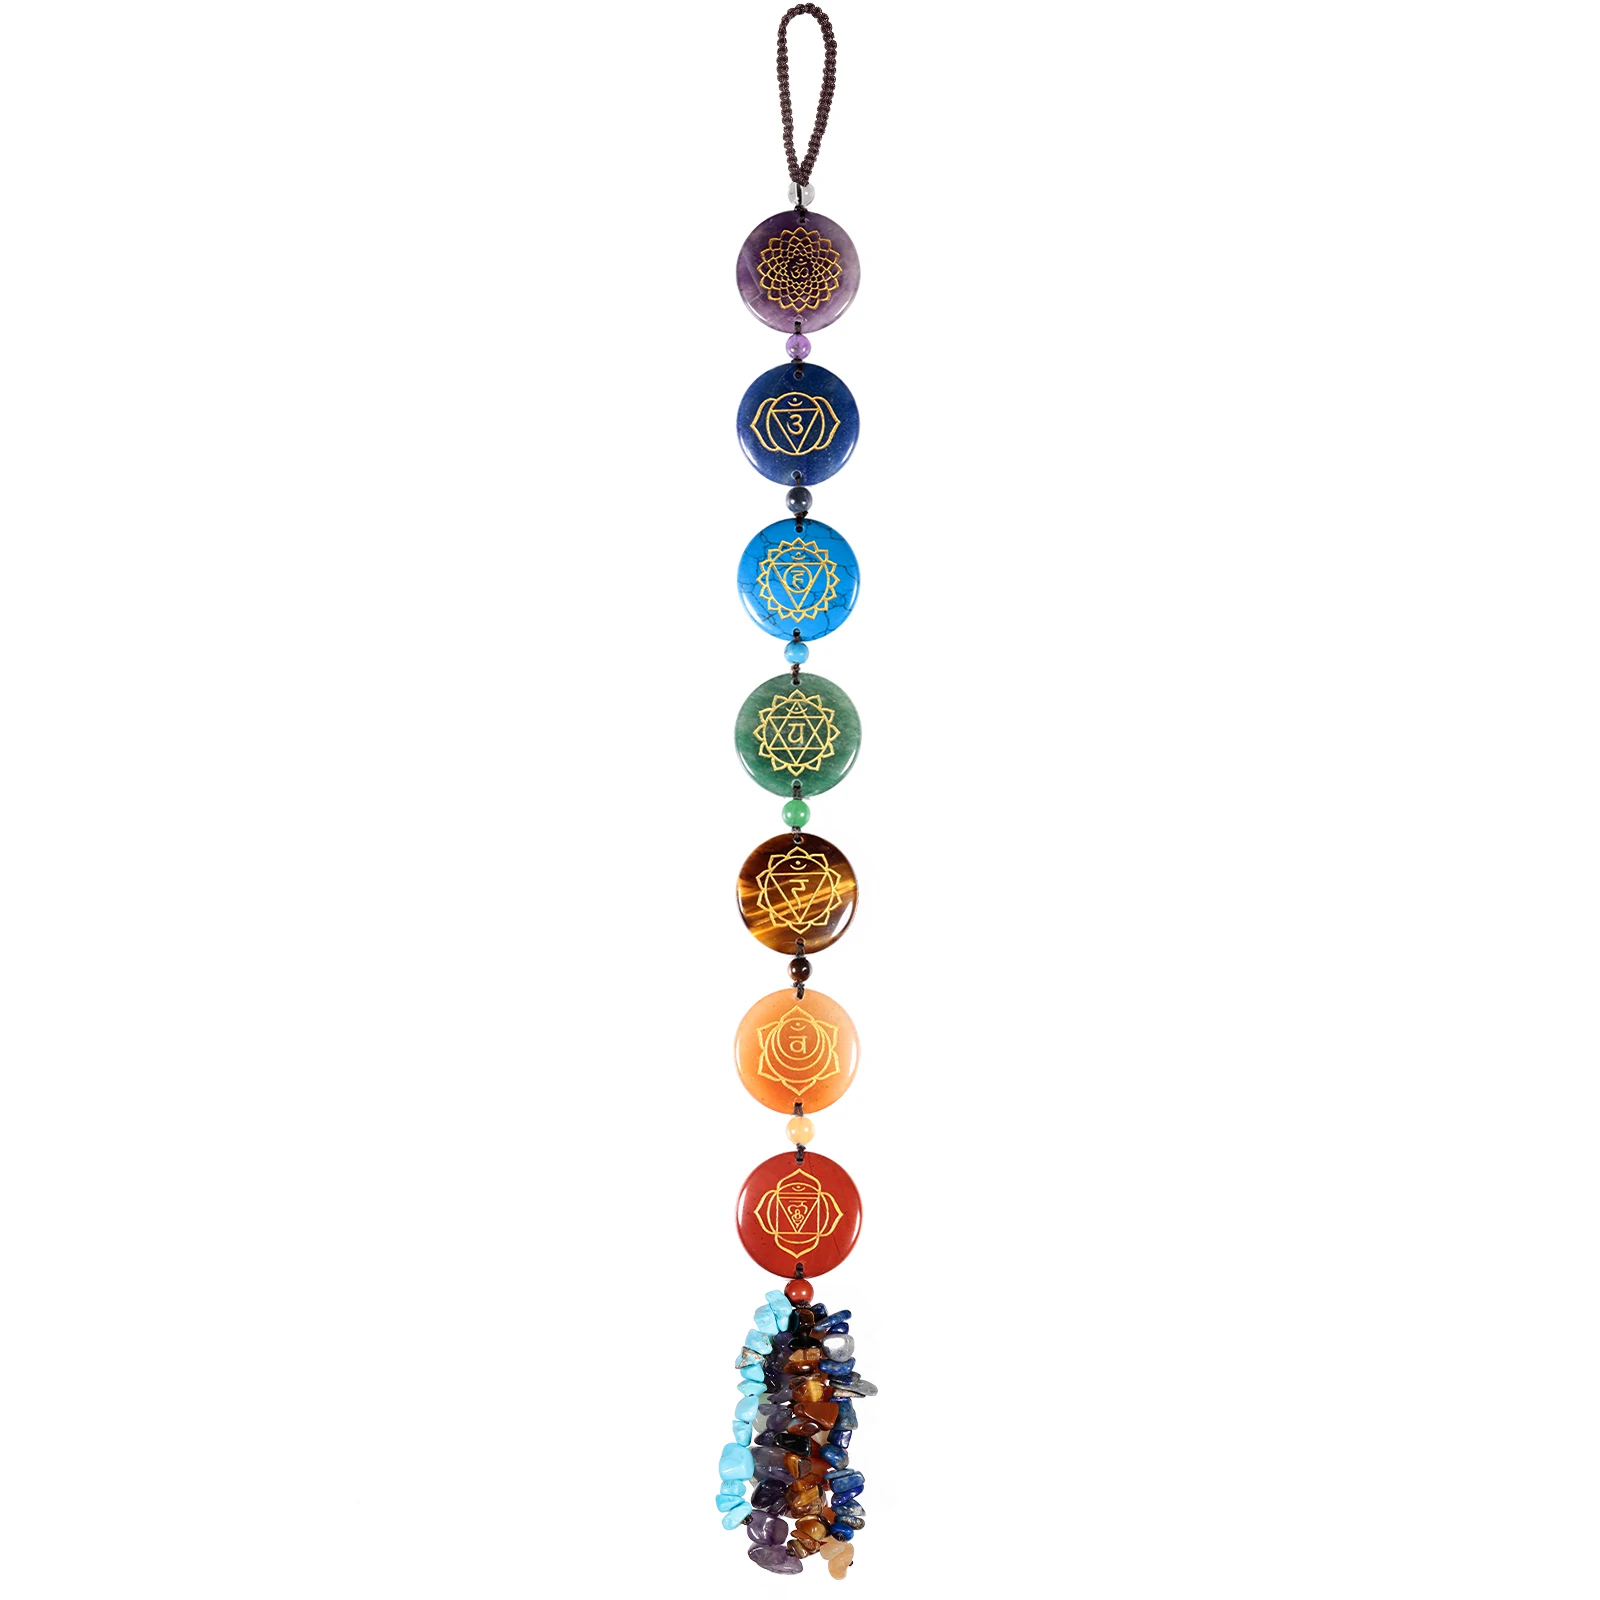 

Healing 7 Chakra Tree of Life Crystal Stone Hanging Ornament Wind Chimes For Home Decor Yoga Meditation